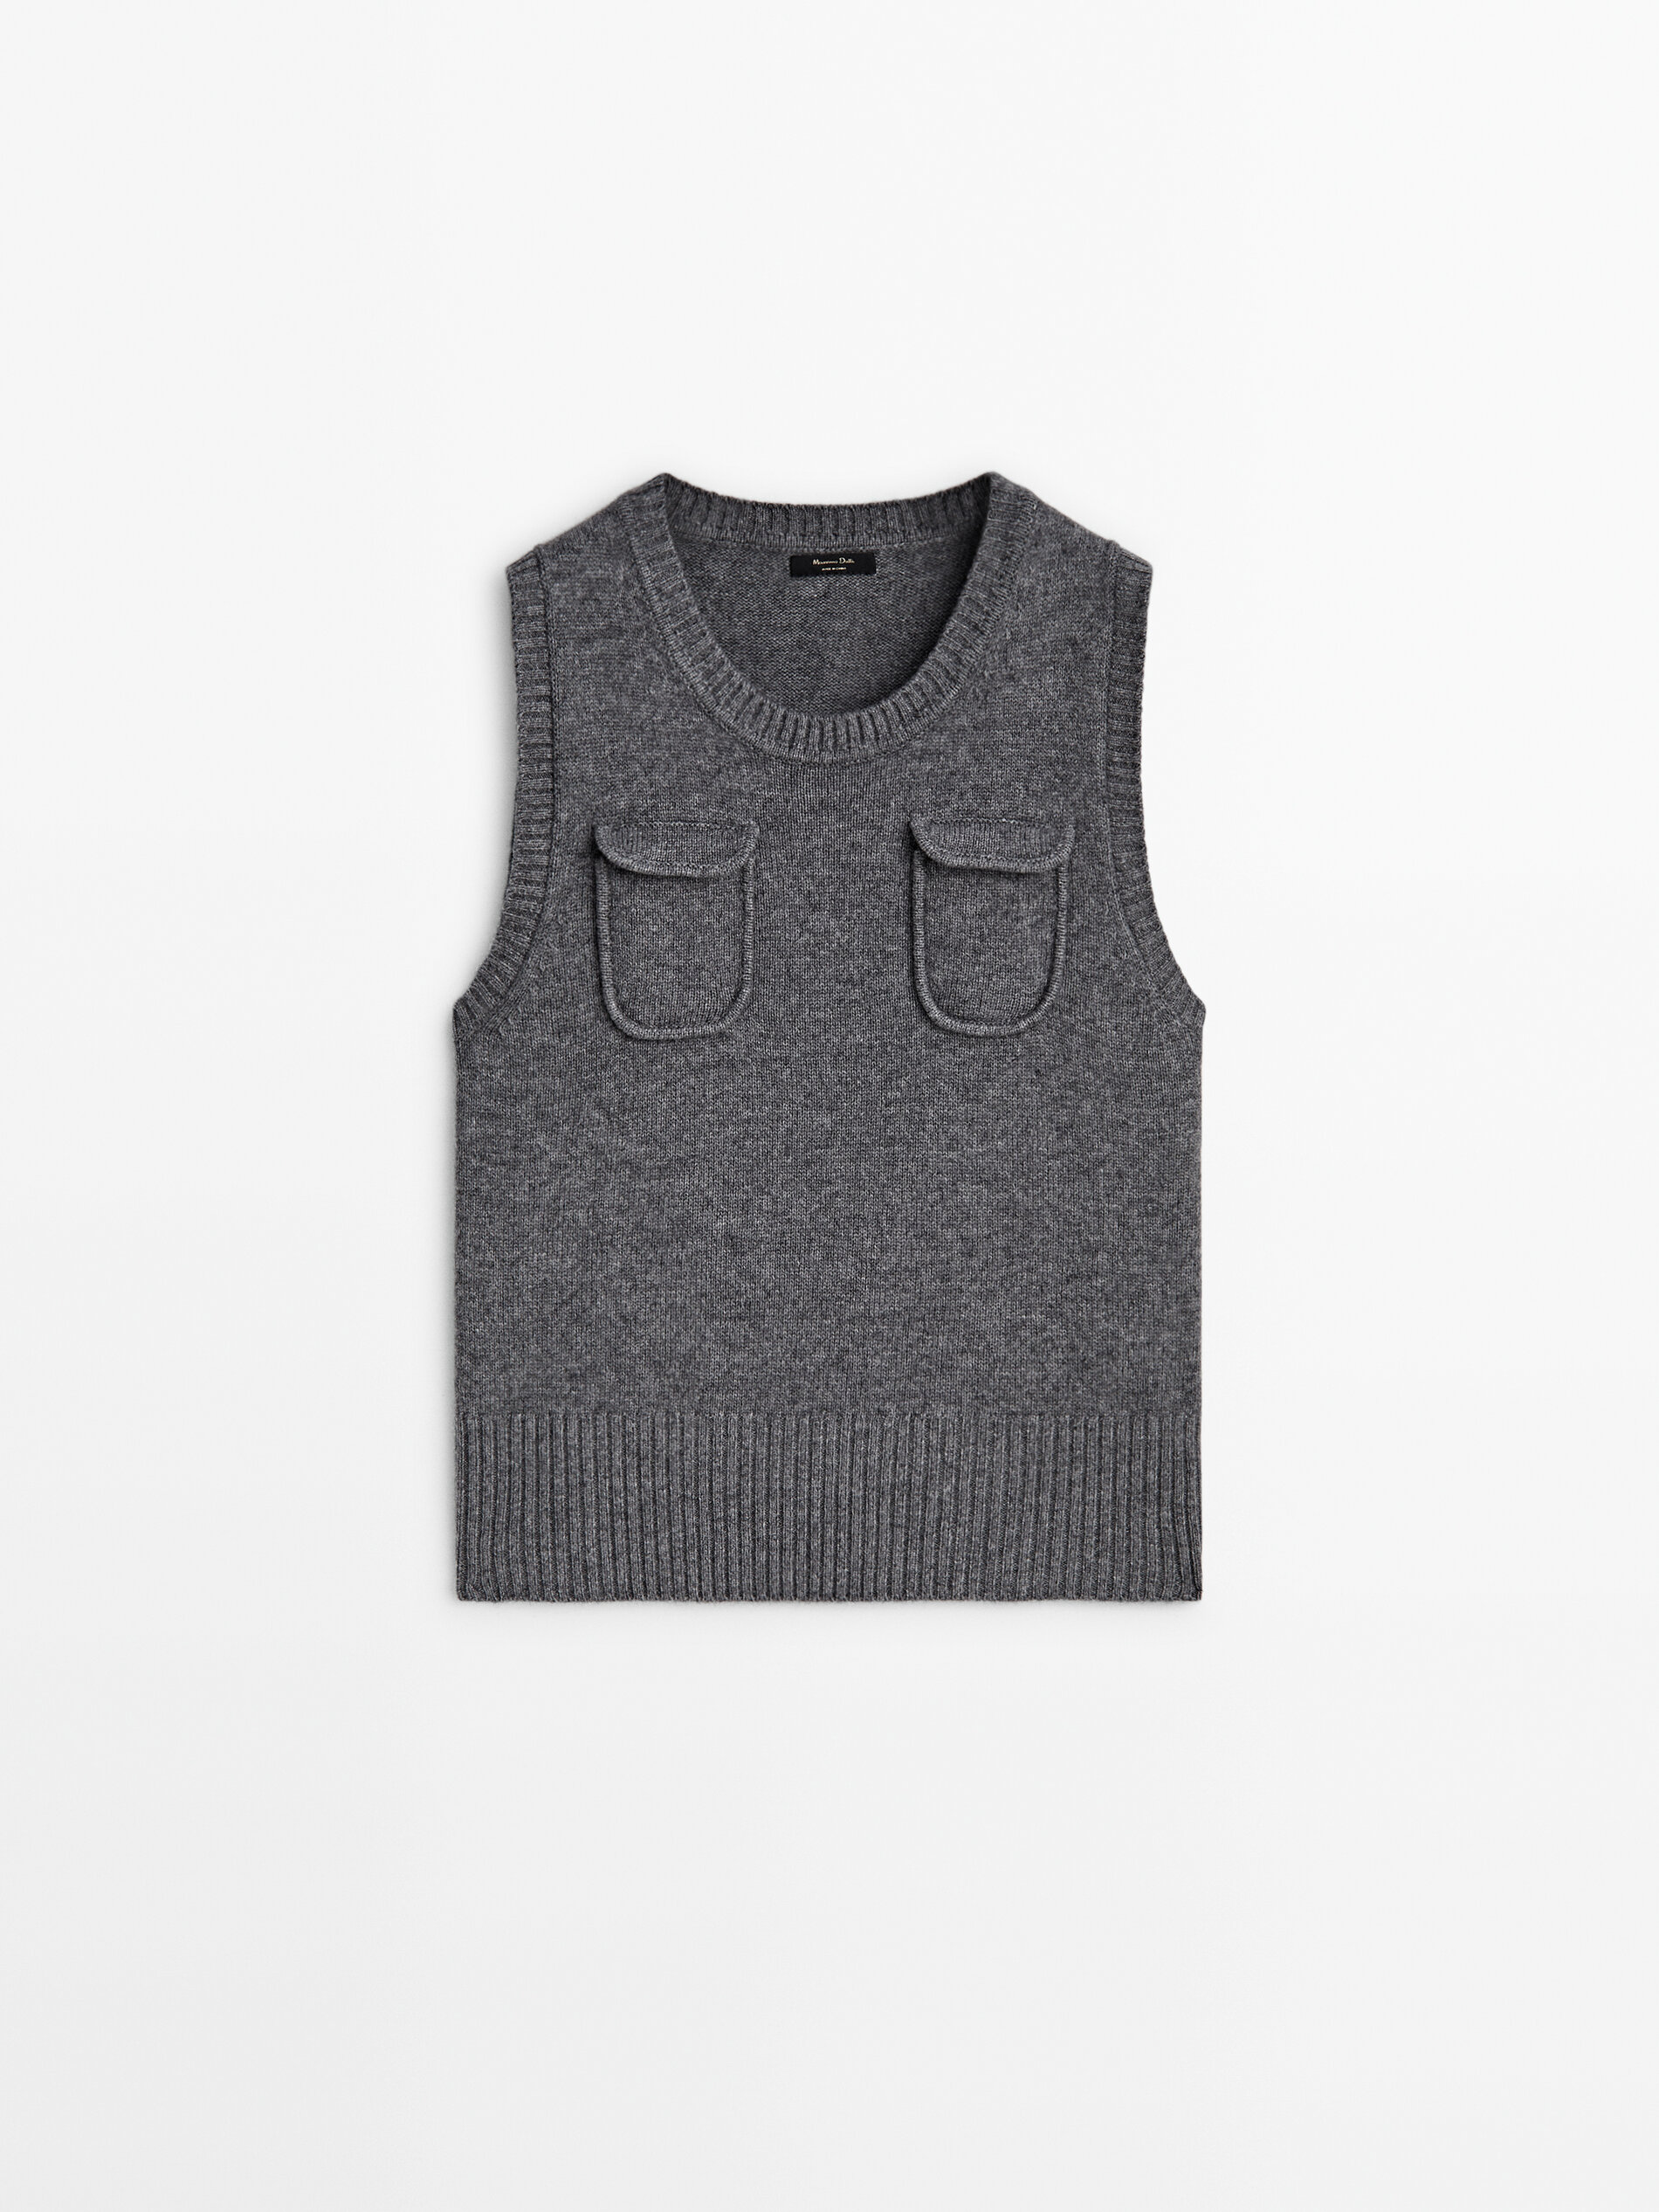 Wool blend knit vest with pockets